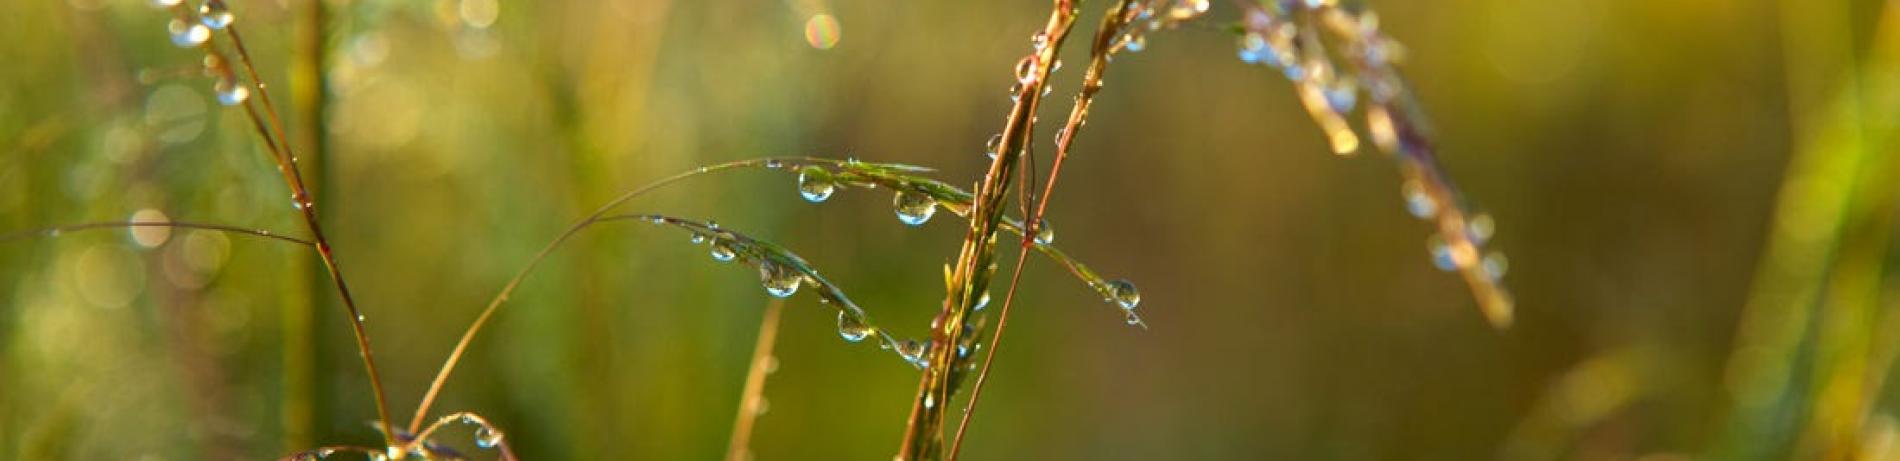 tall grass with water droplets 